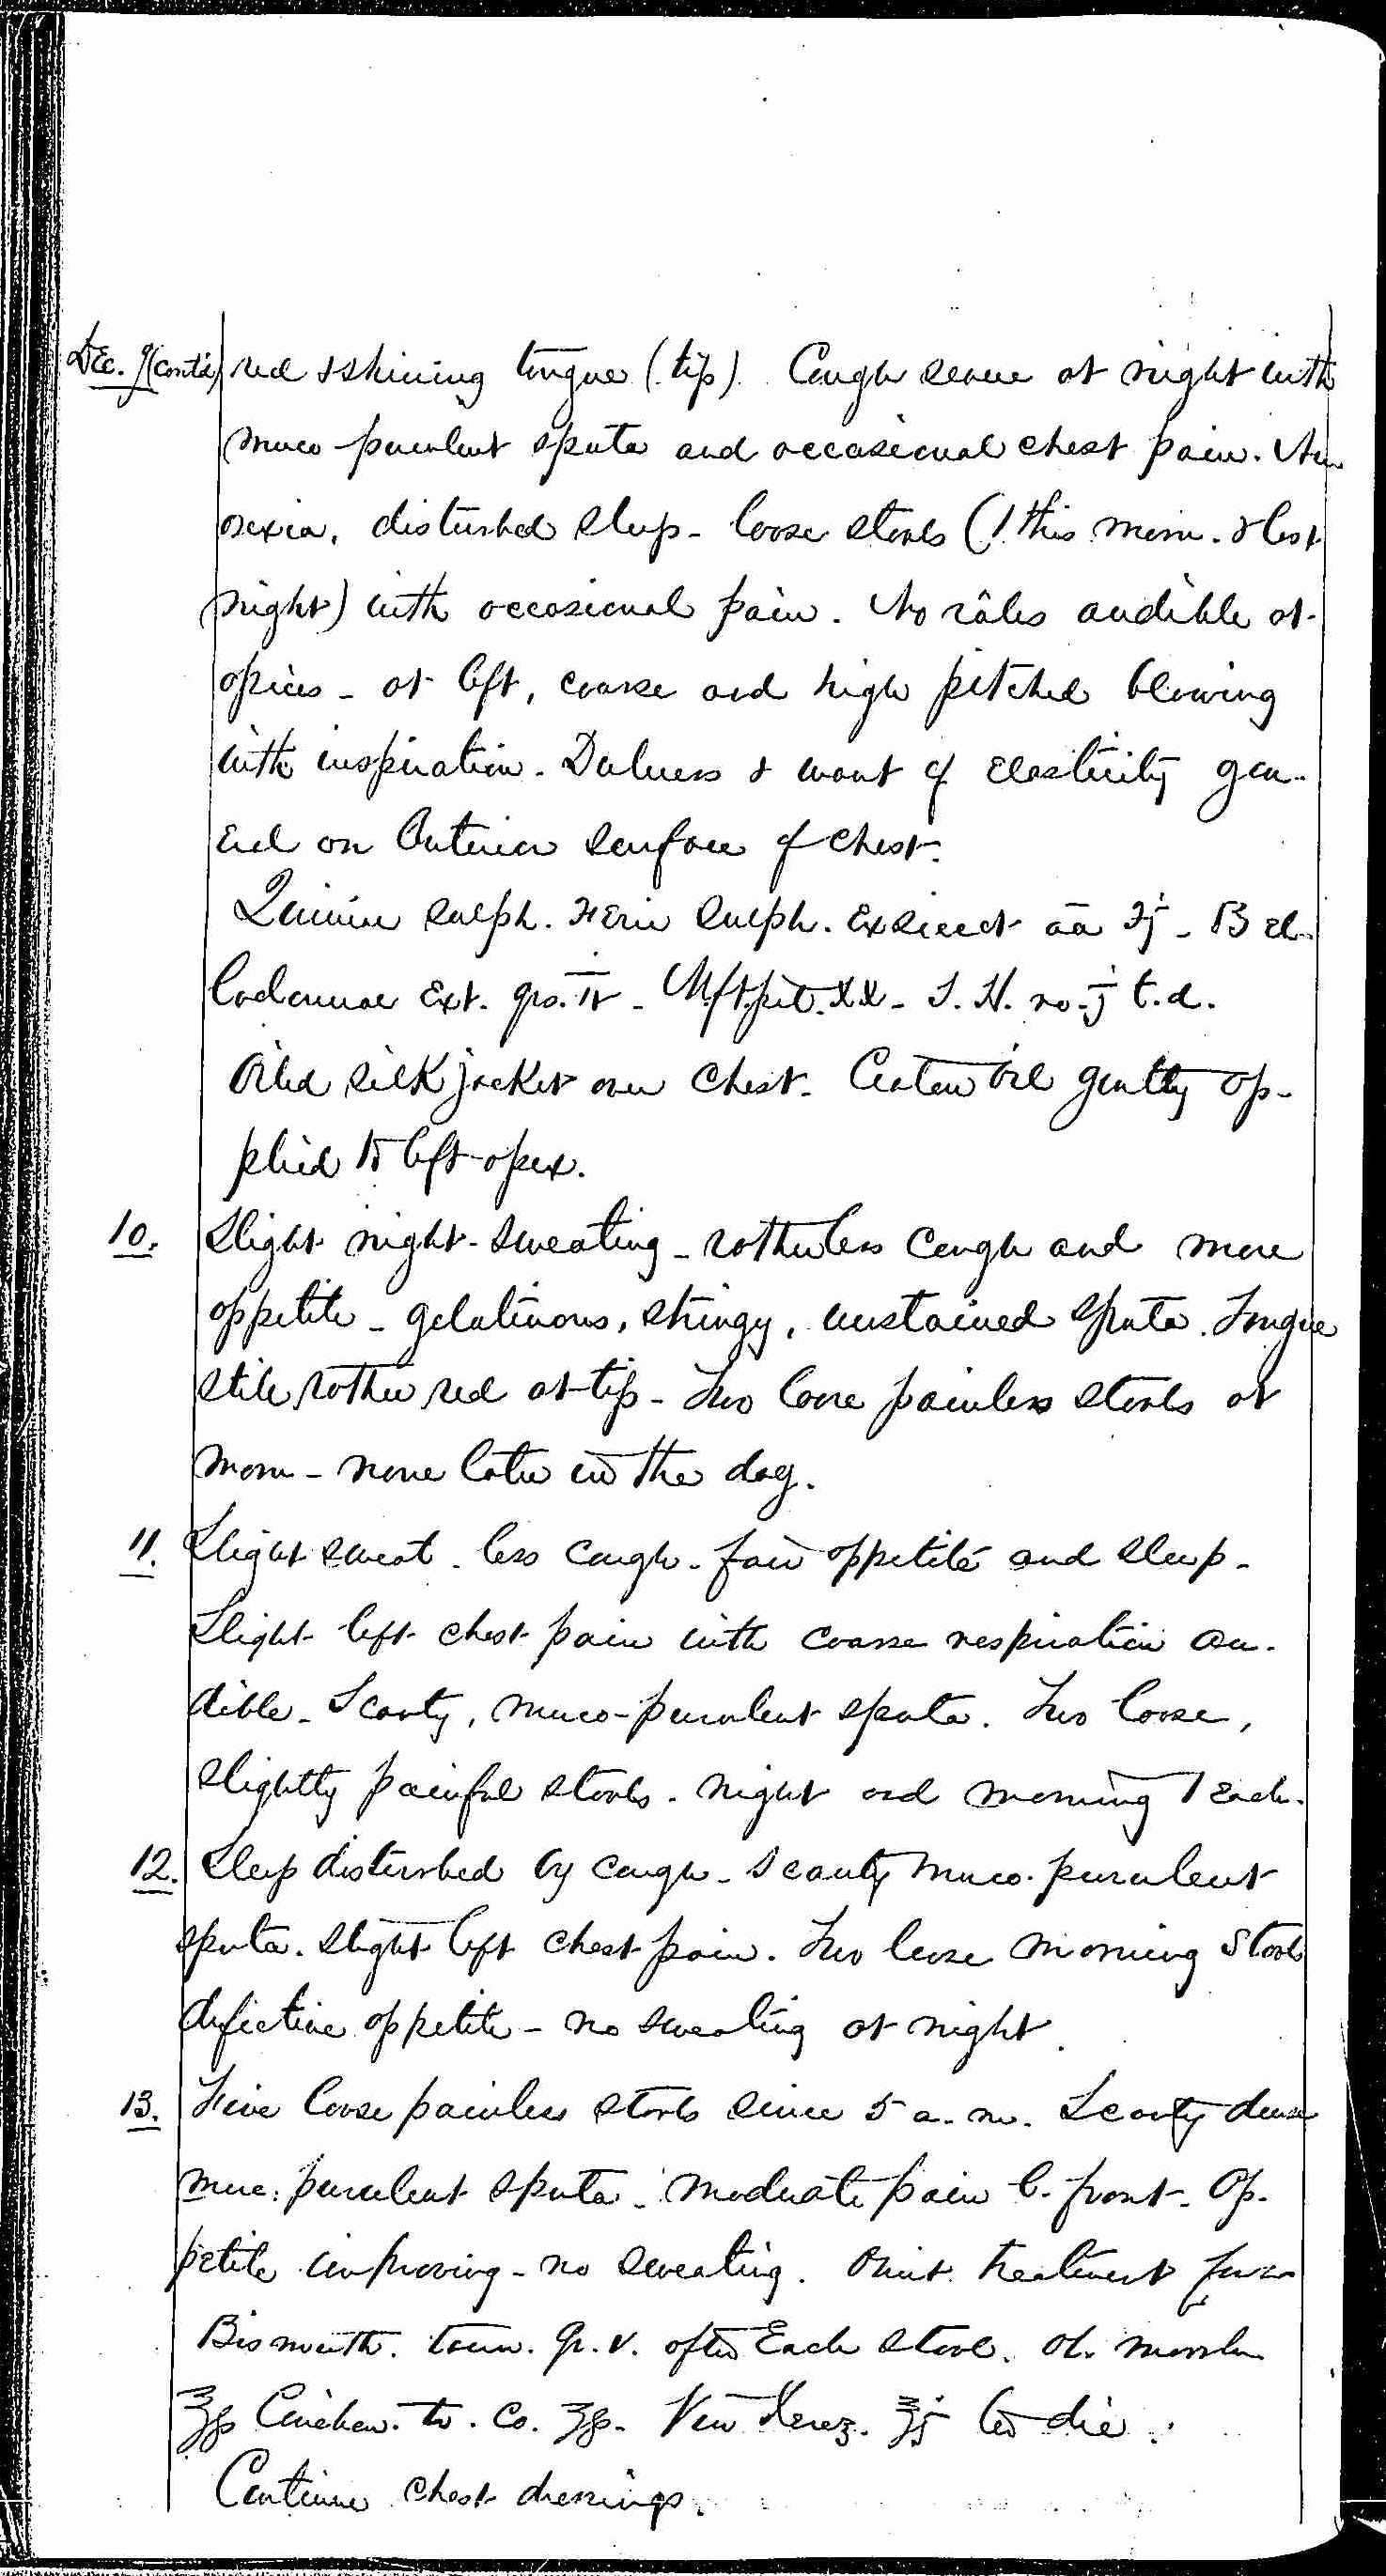 Entry for William Bathwell (page 2 of 13) in the log Hospital Tickets and Case Papers - Naval Hospital - Washington, D.C. - 1868-69